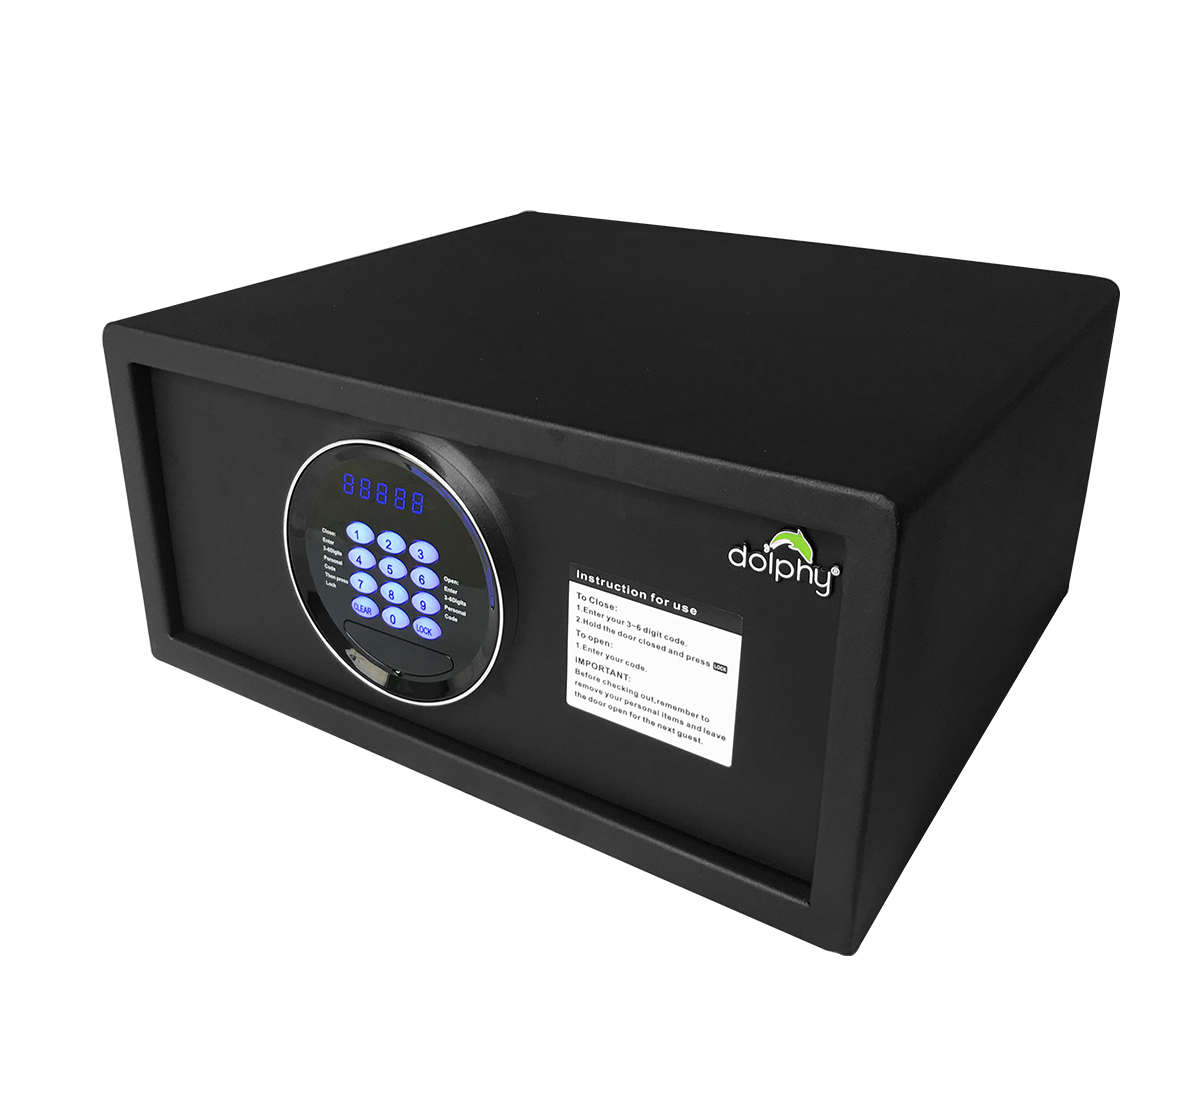 Black door opening electric safe with LED lights 